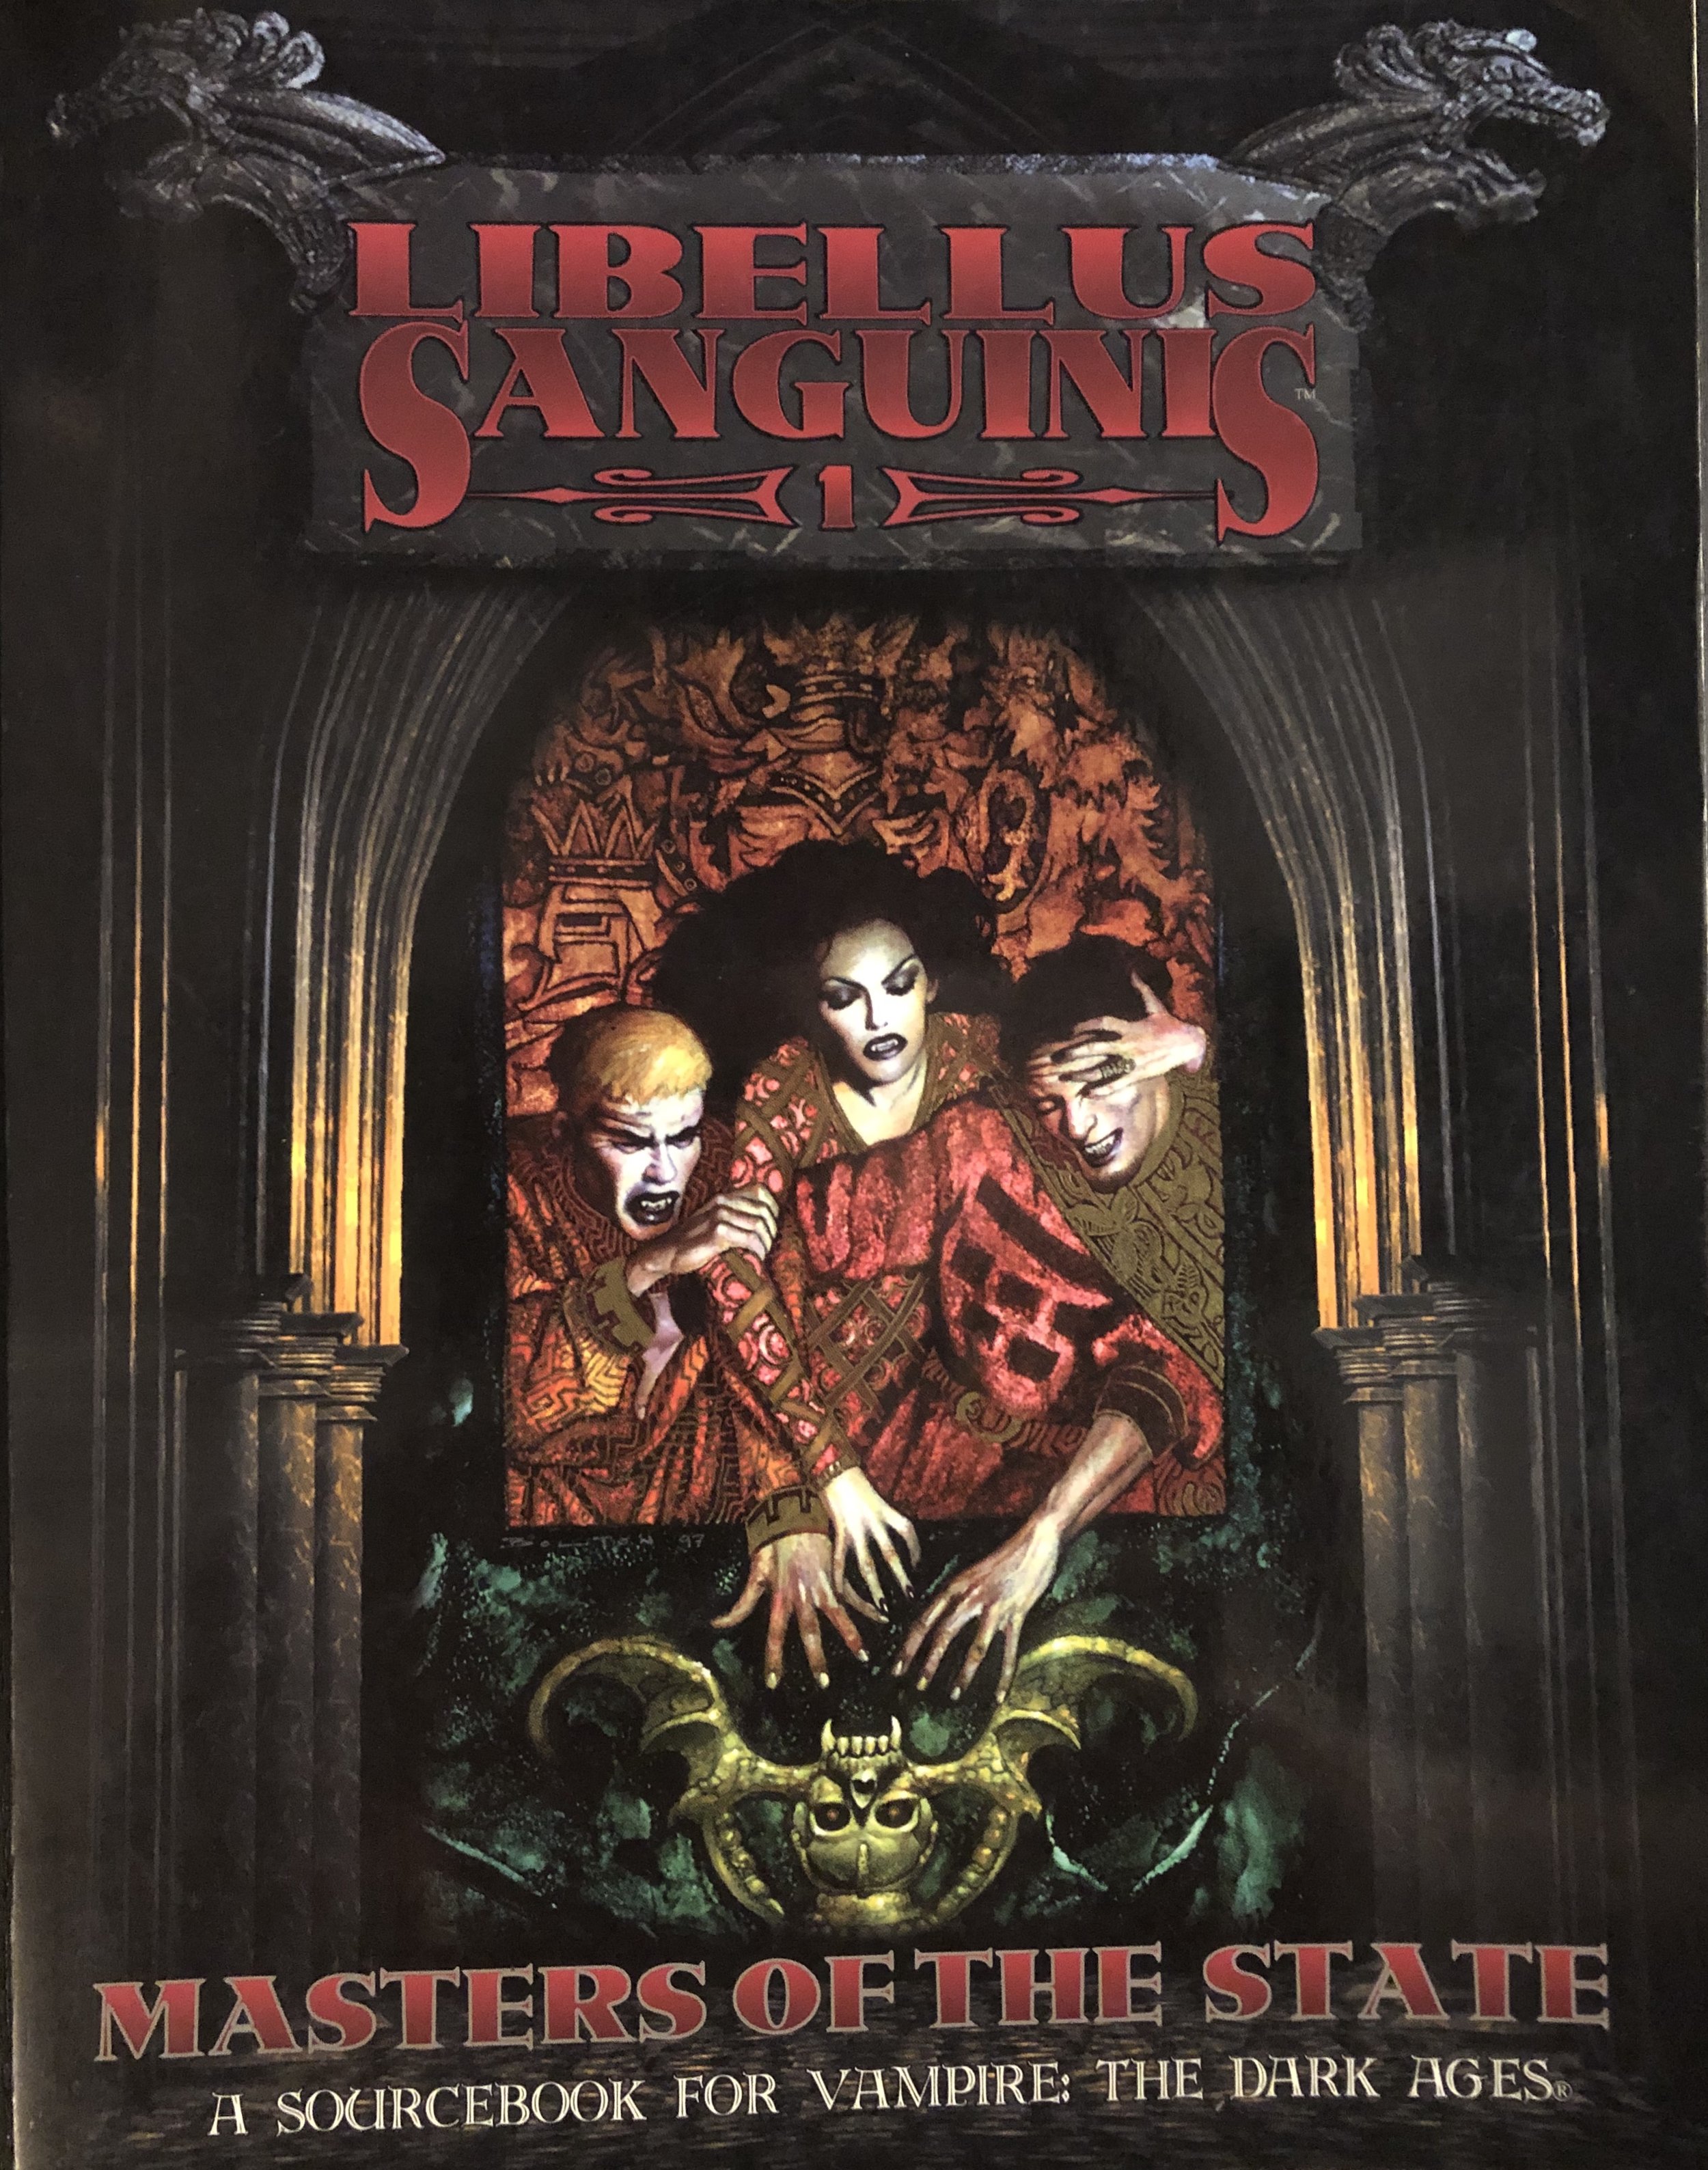 Vampire Ser.: The Dark Ages: Vampire : The Dark Ages by Kevin Hassall 1996, Hardcover for sale online Jennifer Hartshorn Ethan Skemp and Mark Rein-Hagen 